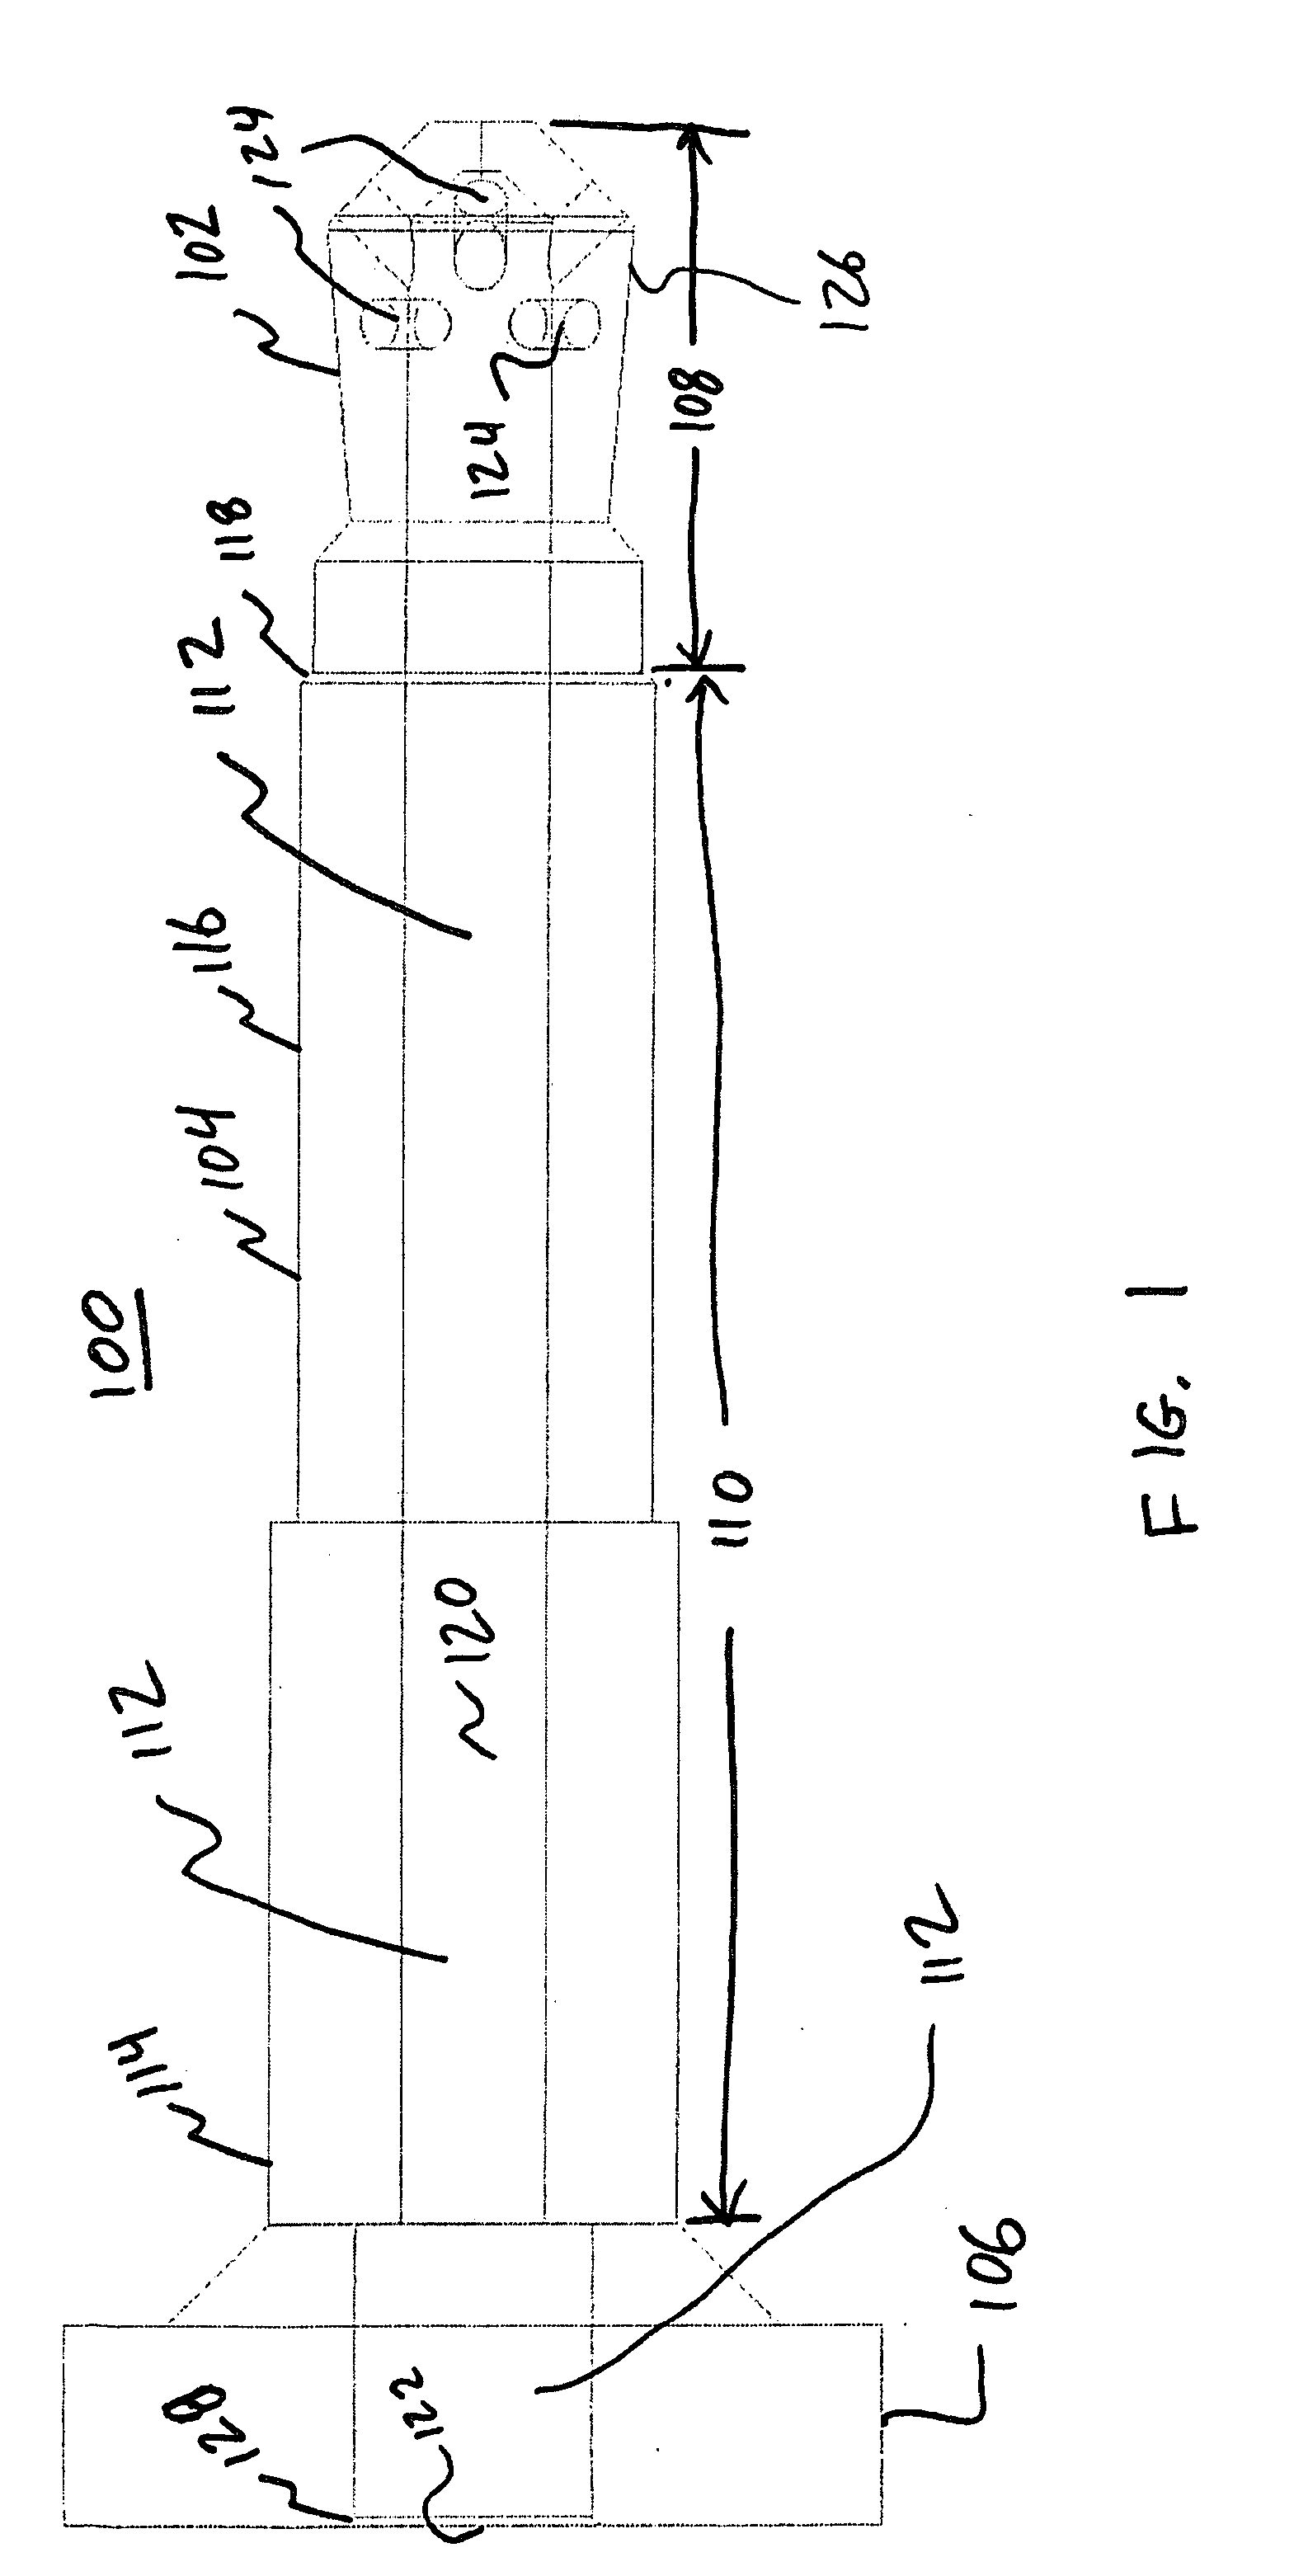 Apparatus and method for cleaning electronic jacks of debris